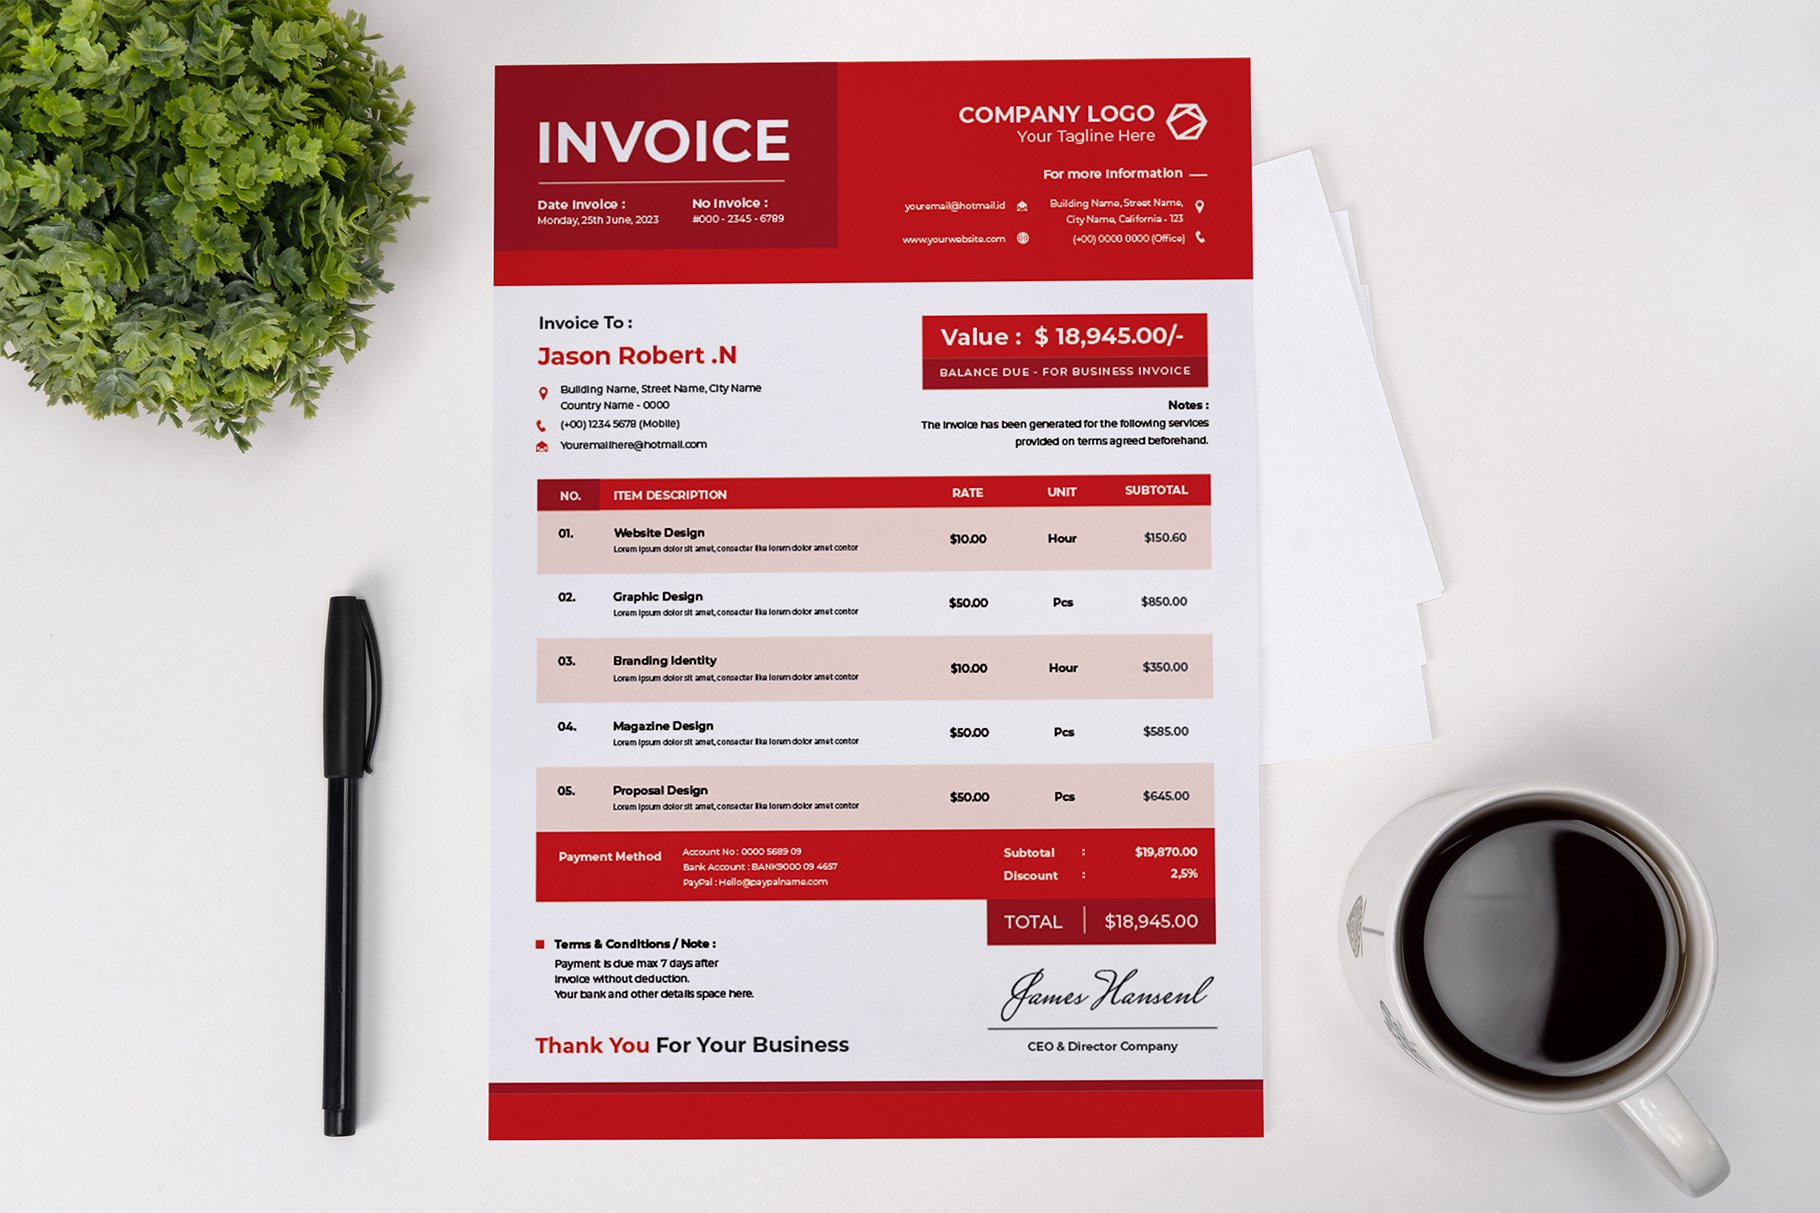 Red Business Tax Invoice preview image.